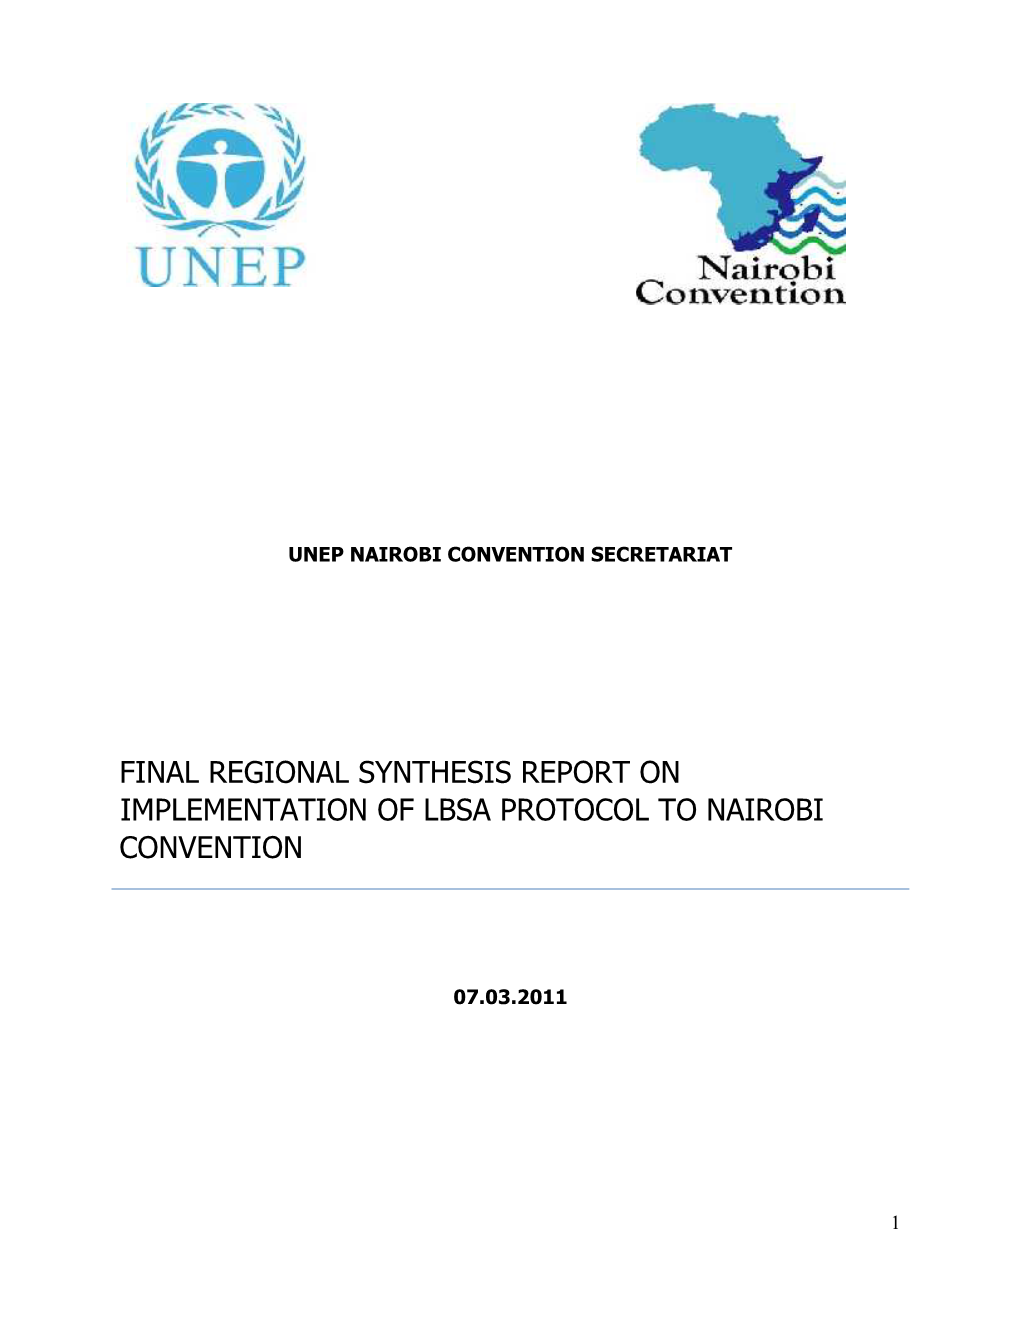 Draft Regional Synthesis Report on Implementation of Lbsa Protocol to Nairobi Convention